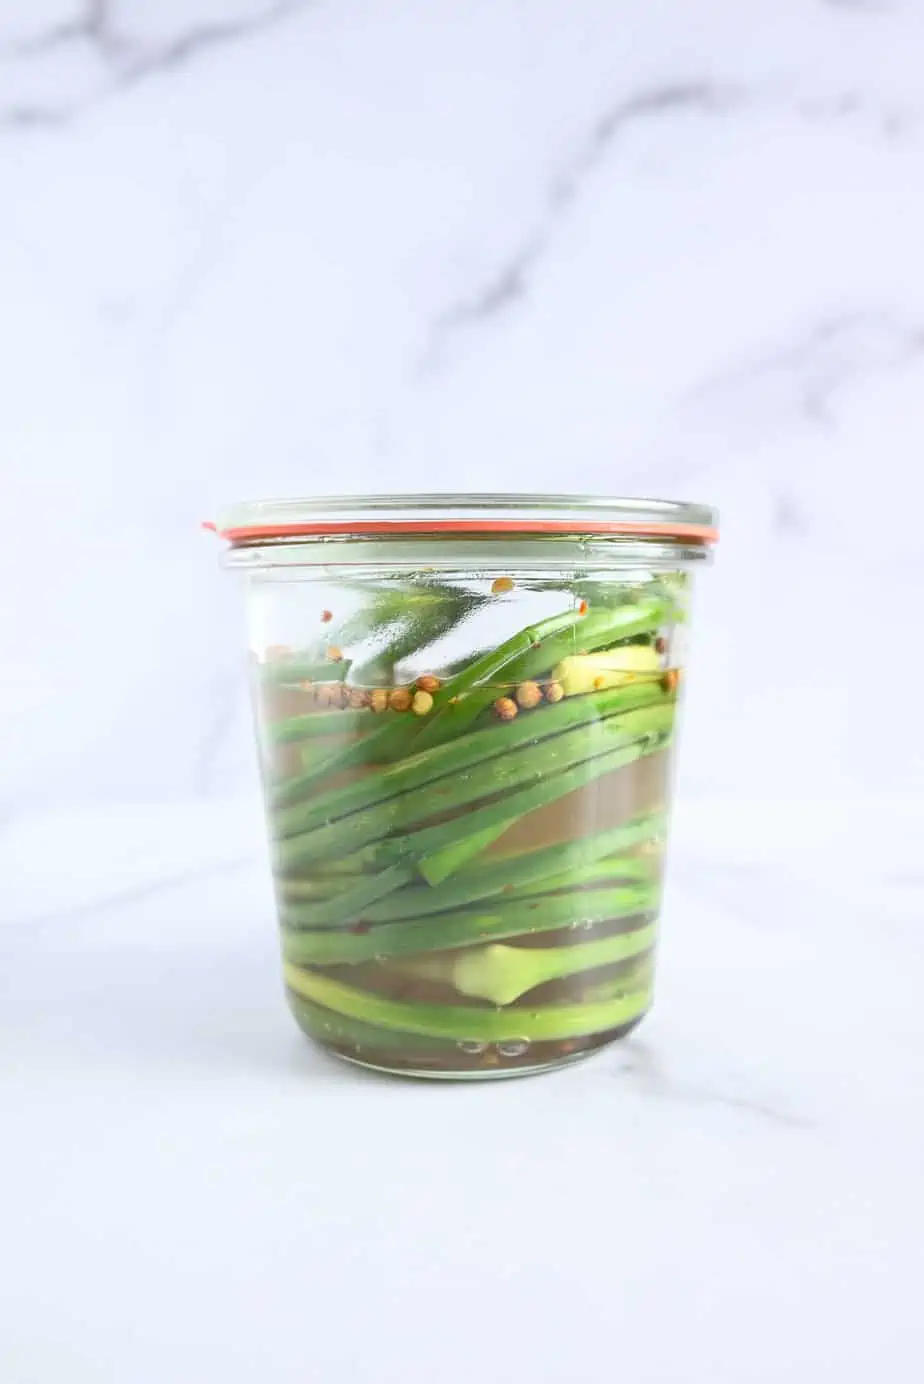 Fresh garlic scapes in a glass jar with brine poured over them.